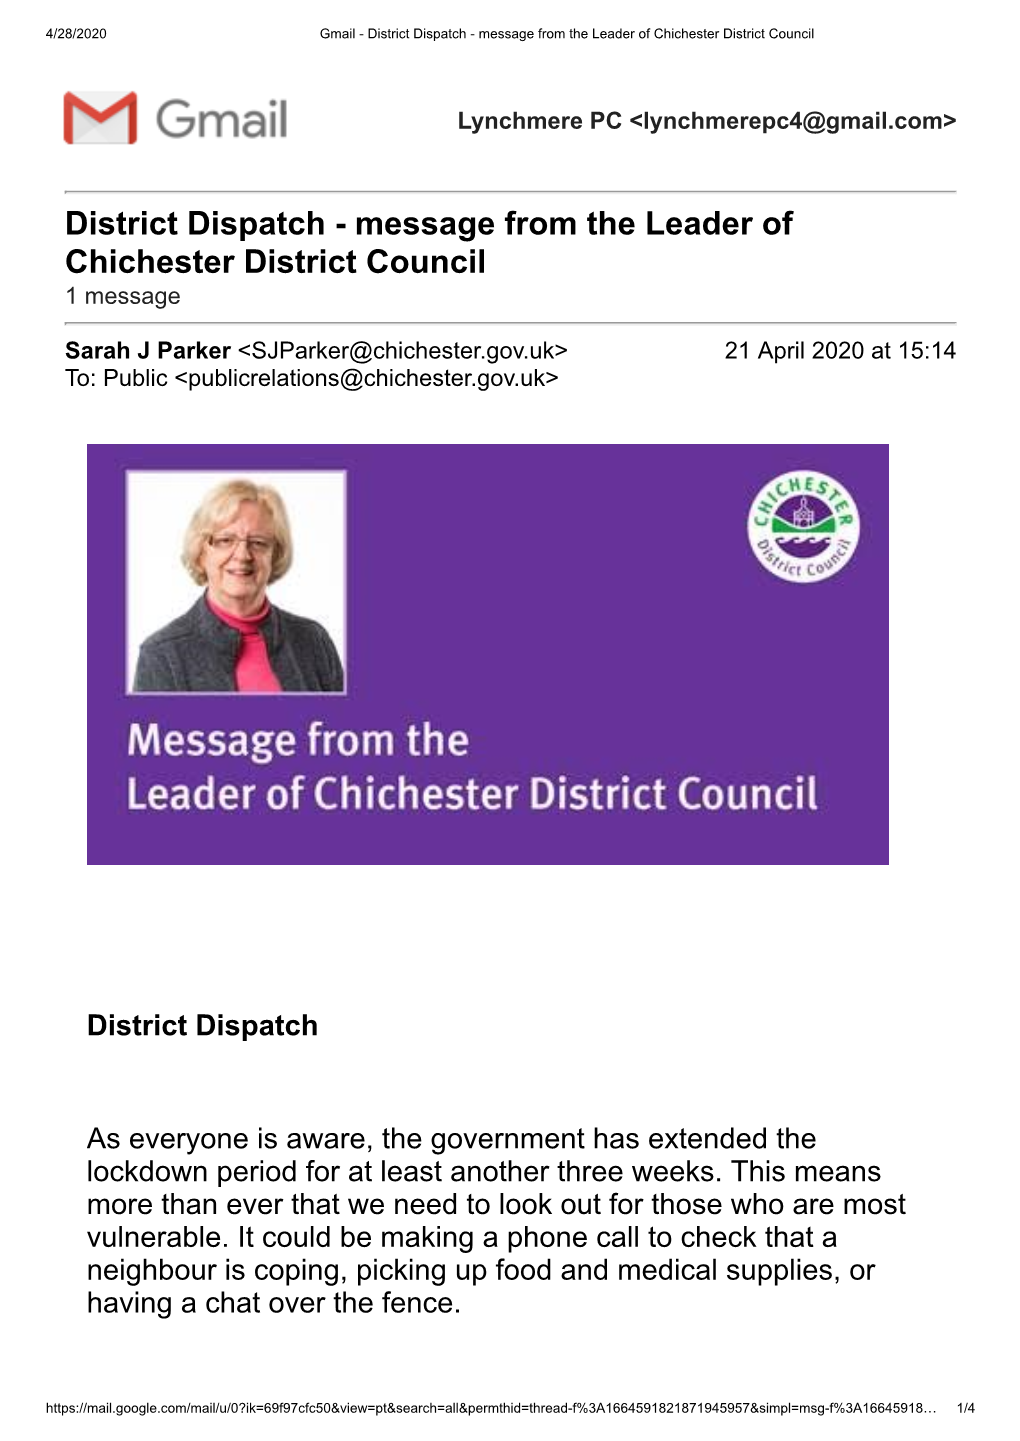 District Dispatch - Message from the Leader of Chichester District Council